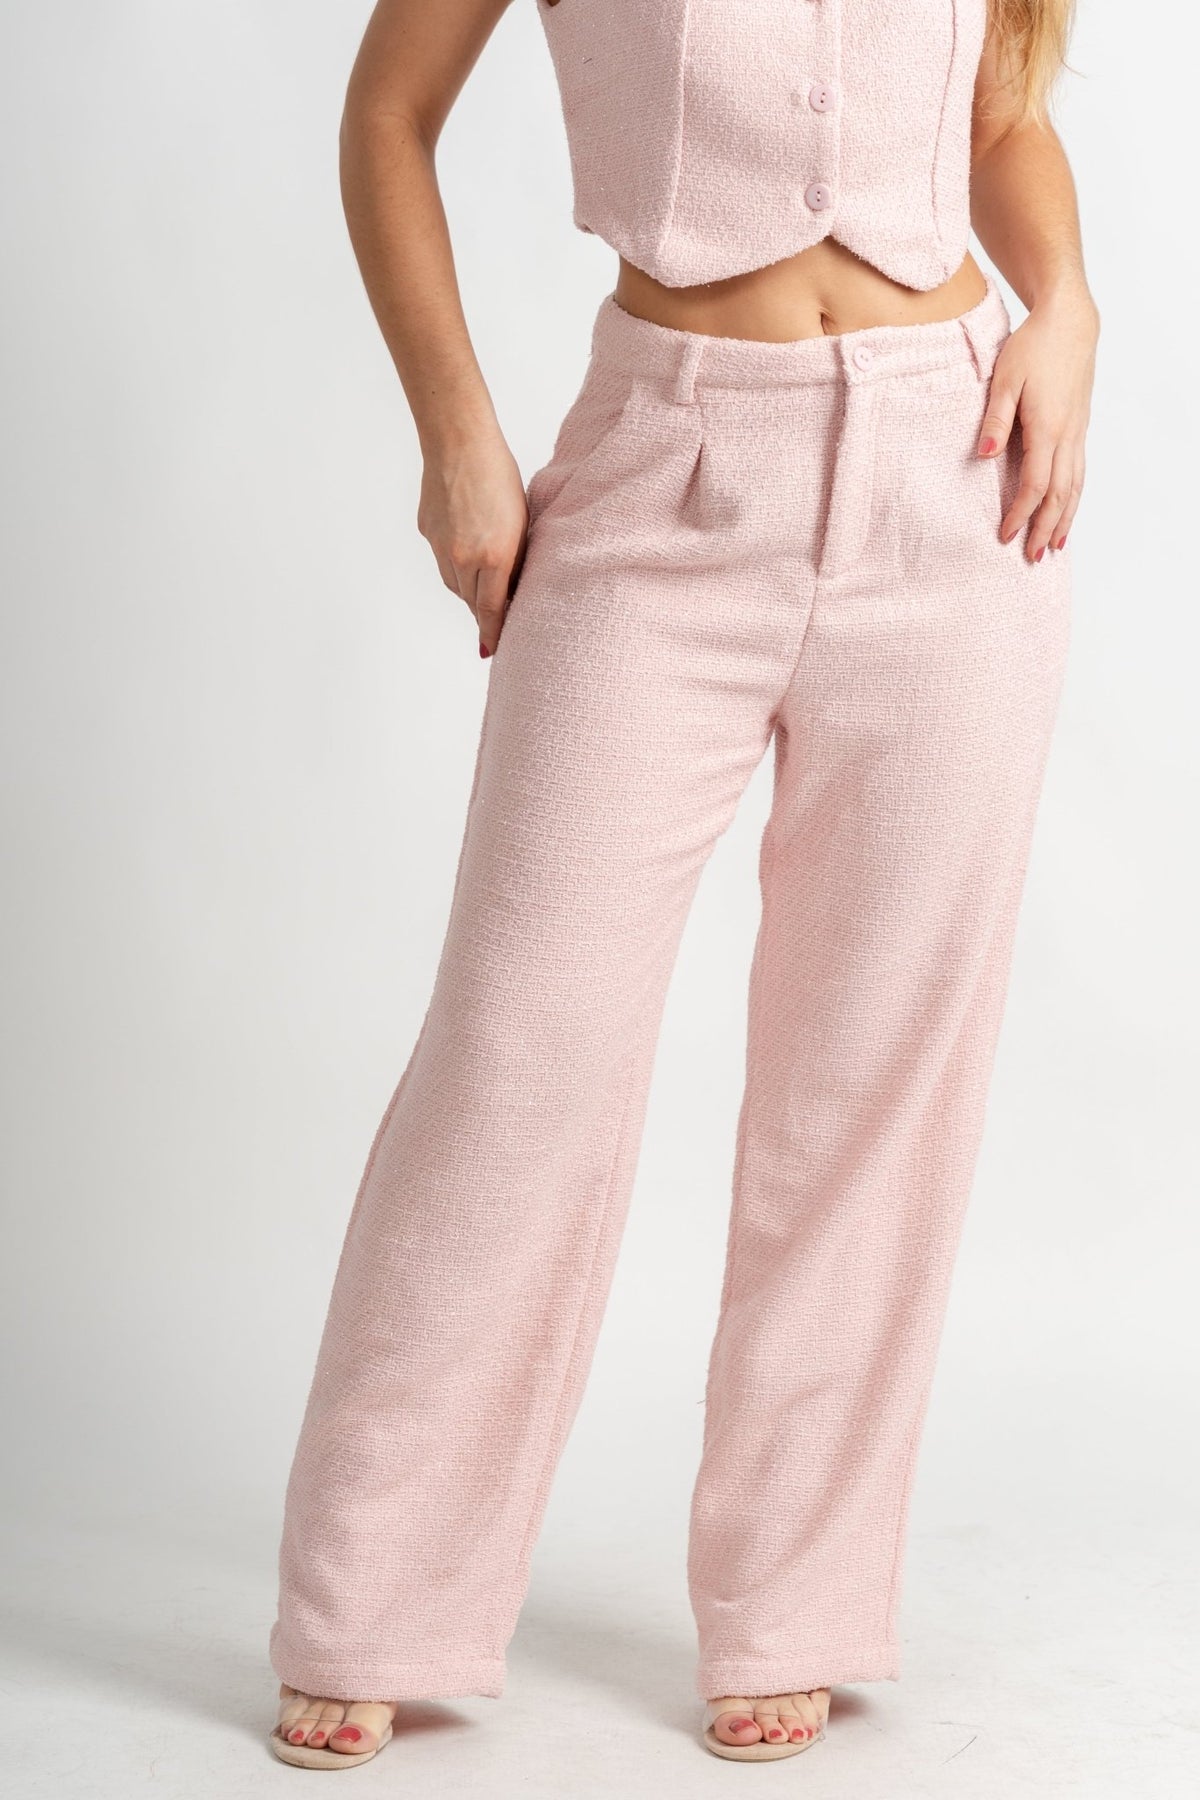 Tweed shimmer wide leg pants soft pink - Trendy T-Shirts for Valentine's Day at Lush Fashion Lounge Boutique in Oklahoma City